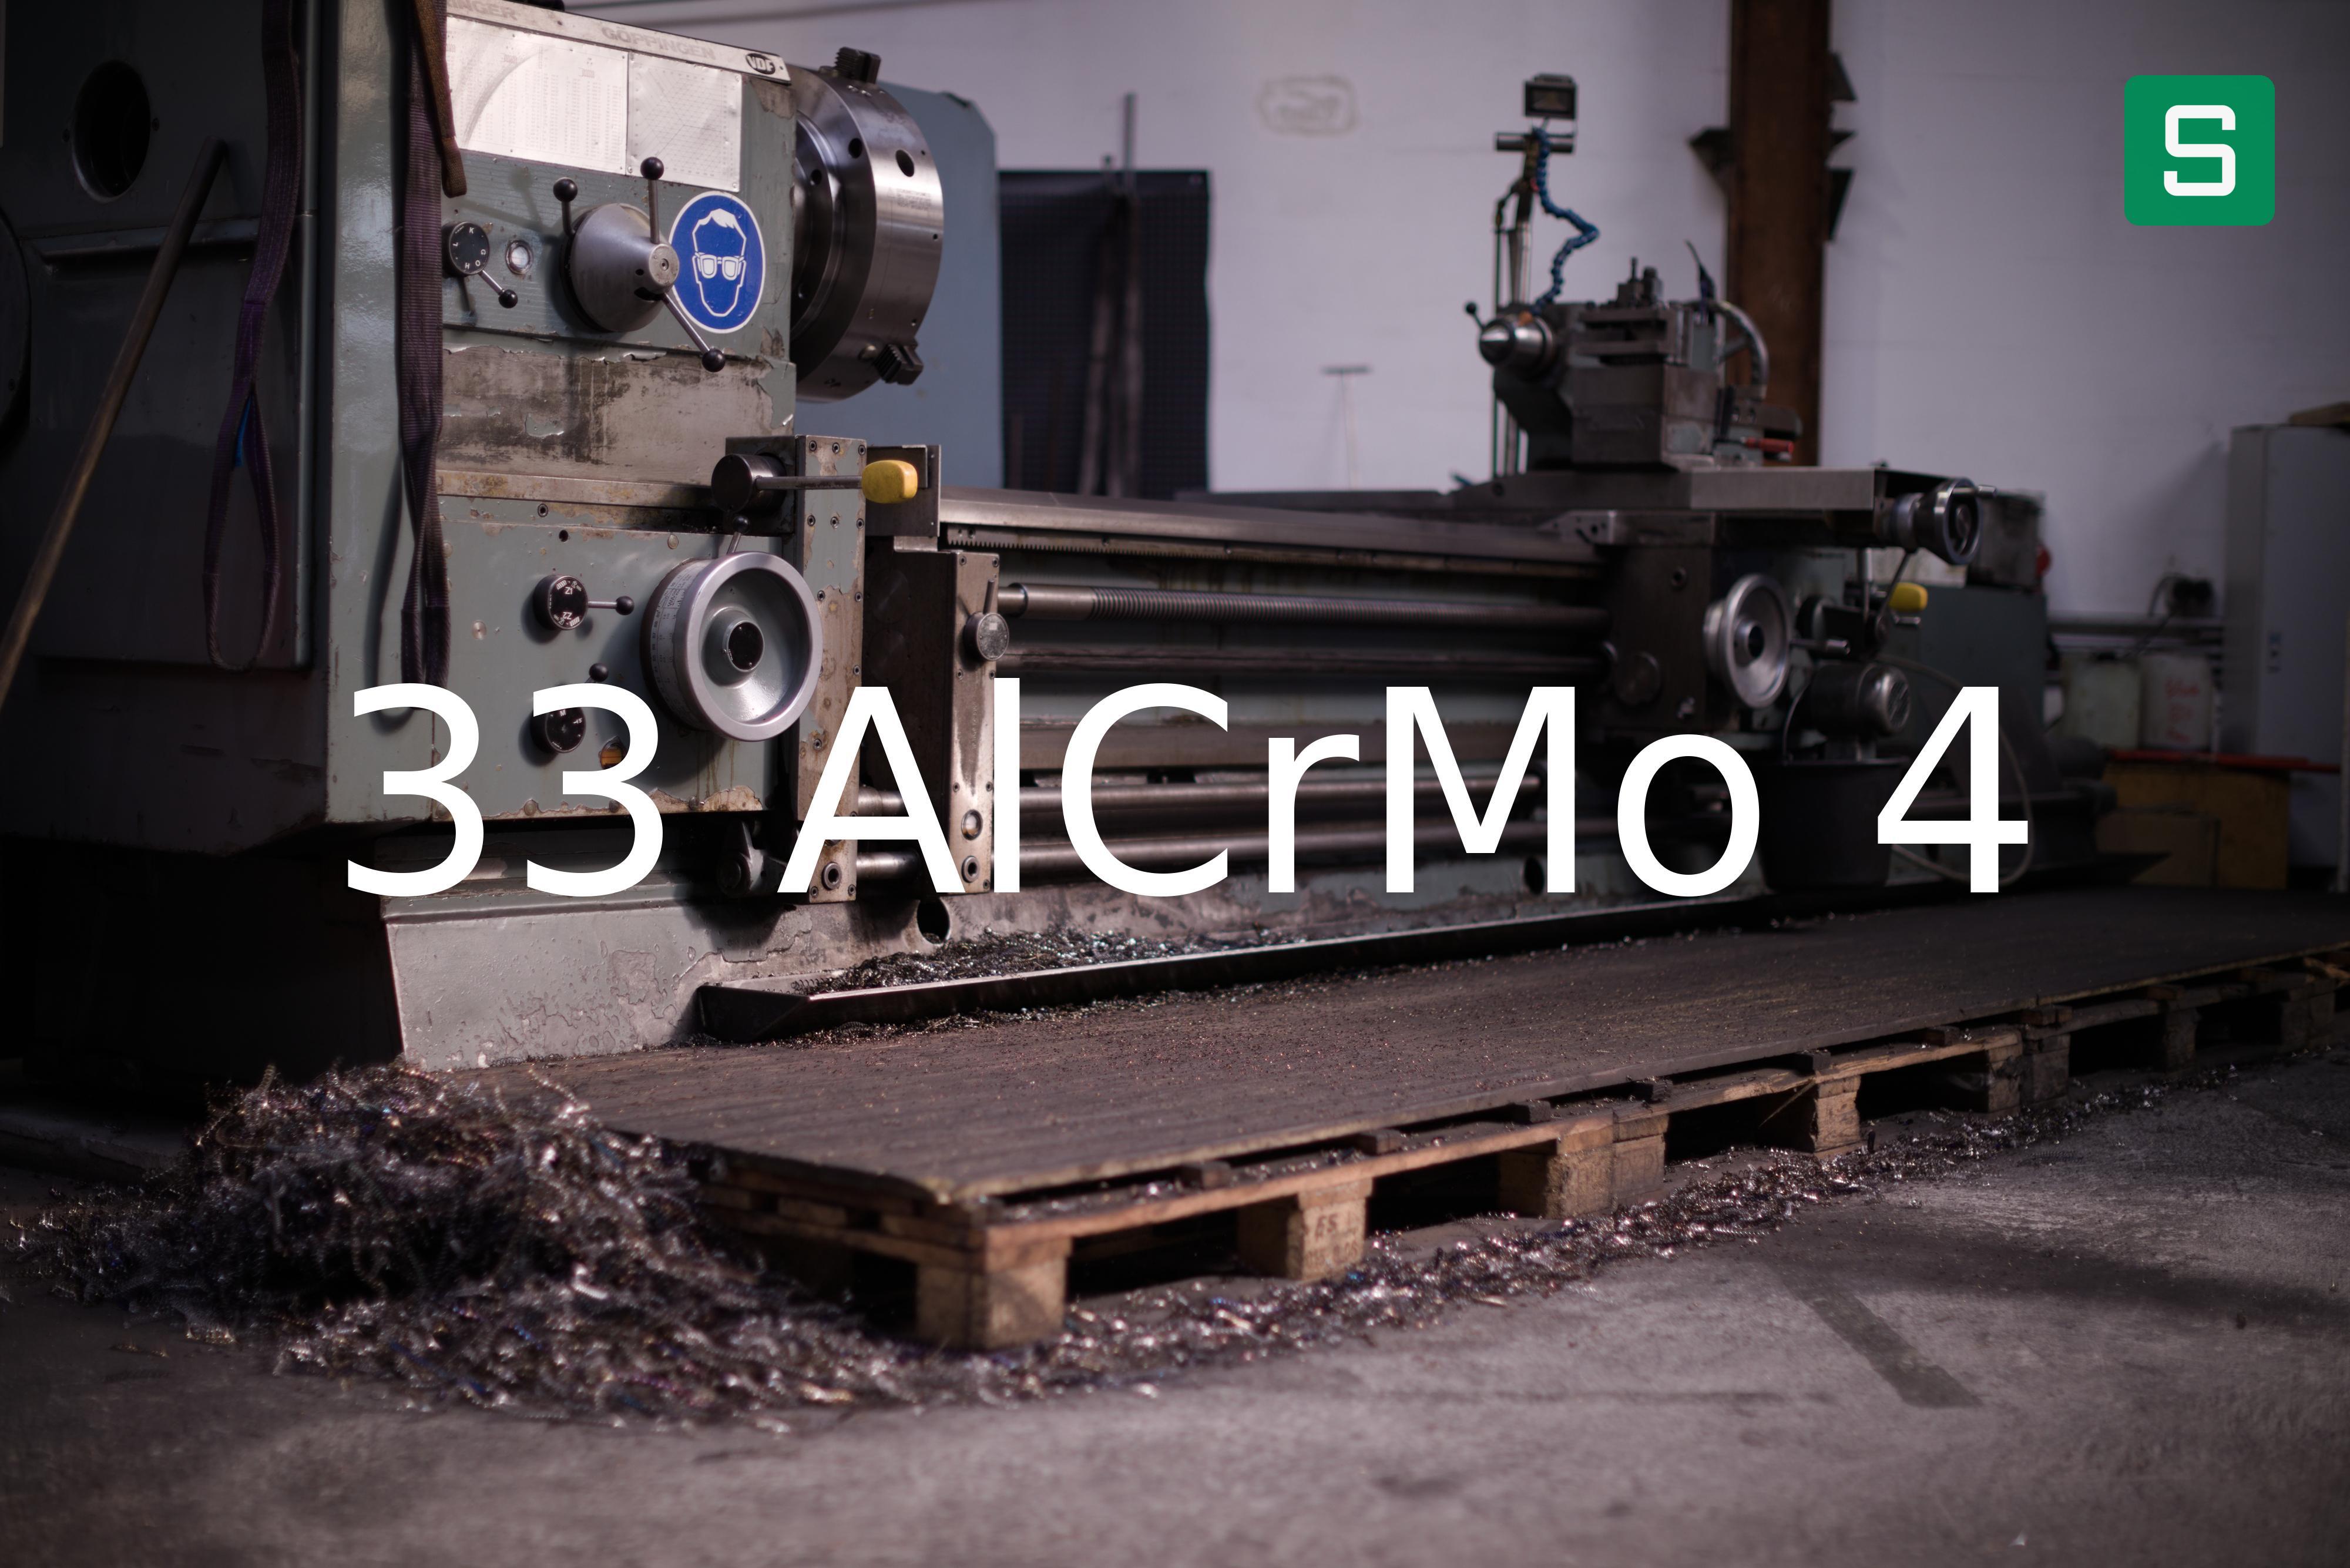 Steel Material: 33 AlCrMo 4